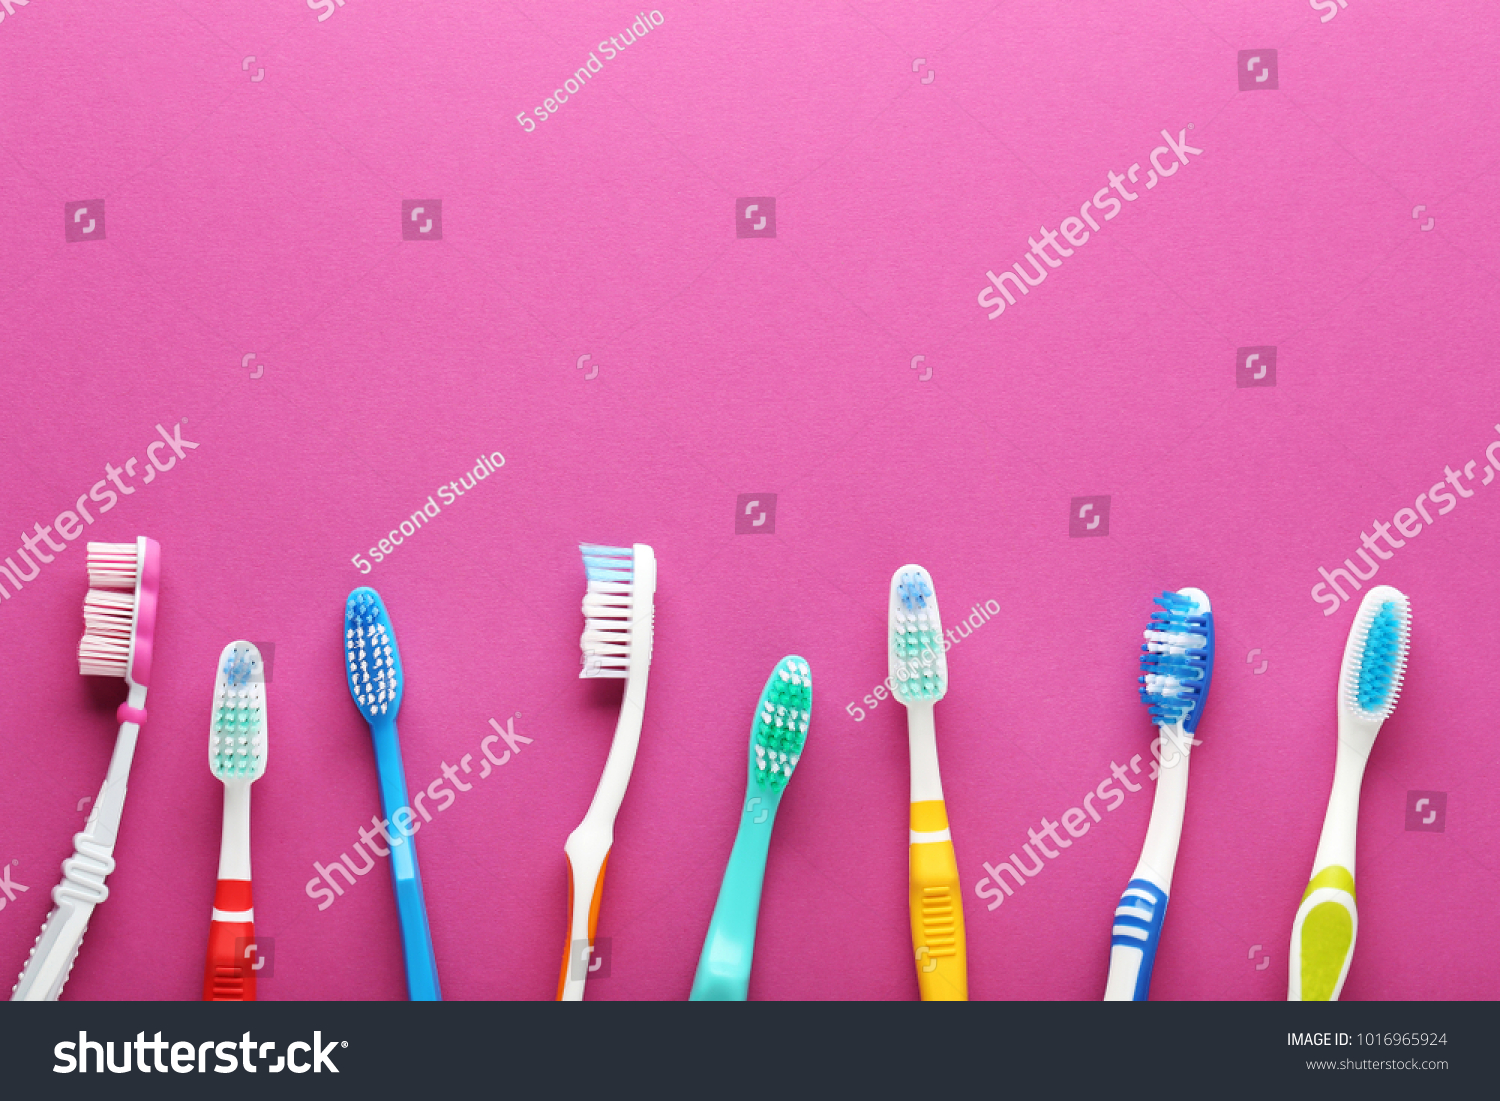 Toothbrushes on pink background #1016965924